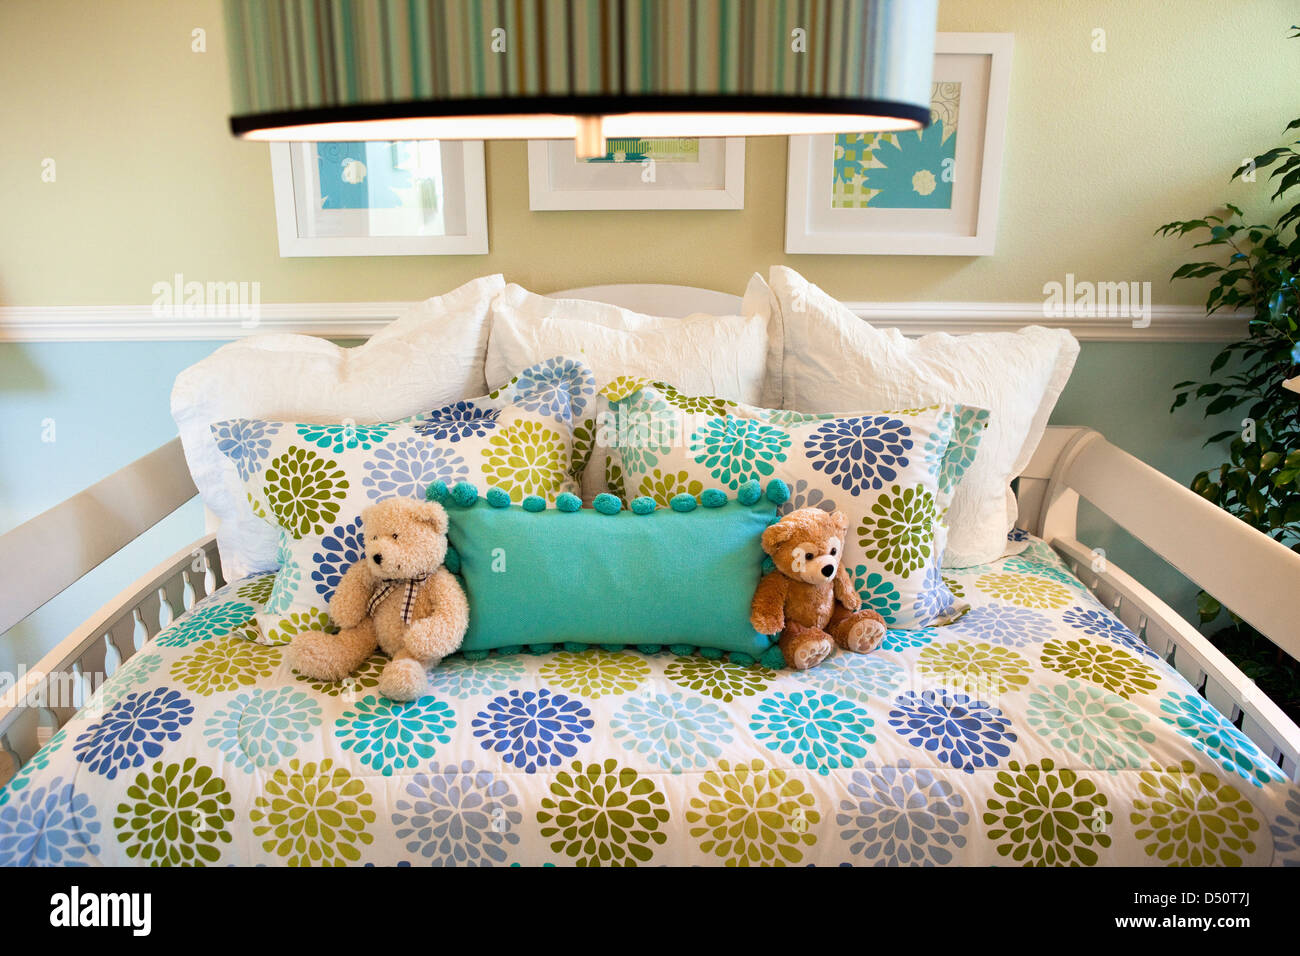 Teddy bears and pillows arranged on day bed, Tustin, California, USA Stock Photo